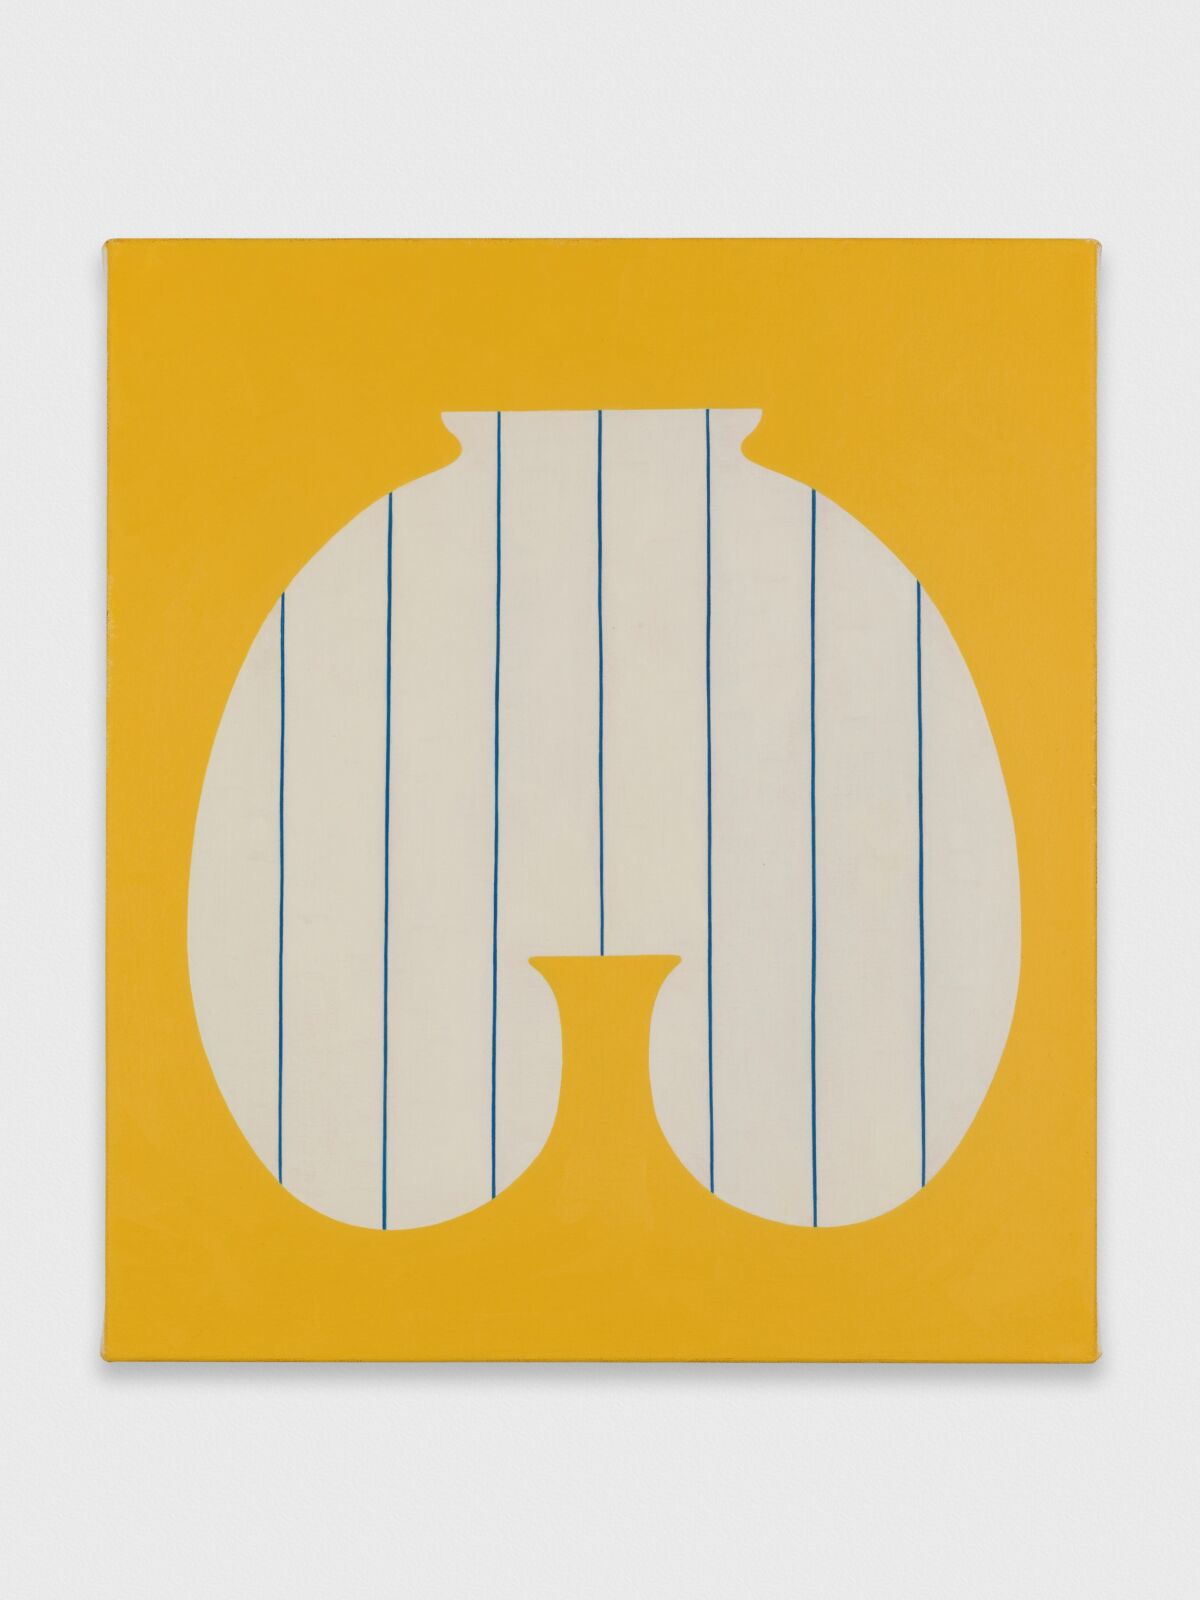 “Peer" by Alice Tippit, 2019. Oil on canvas, 16 inches by 14 inches. 